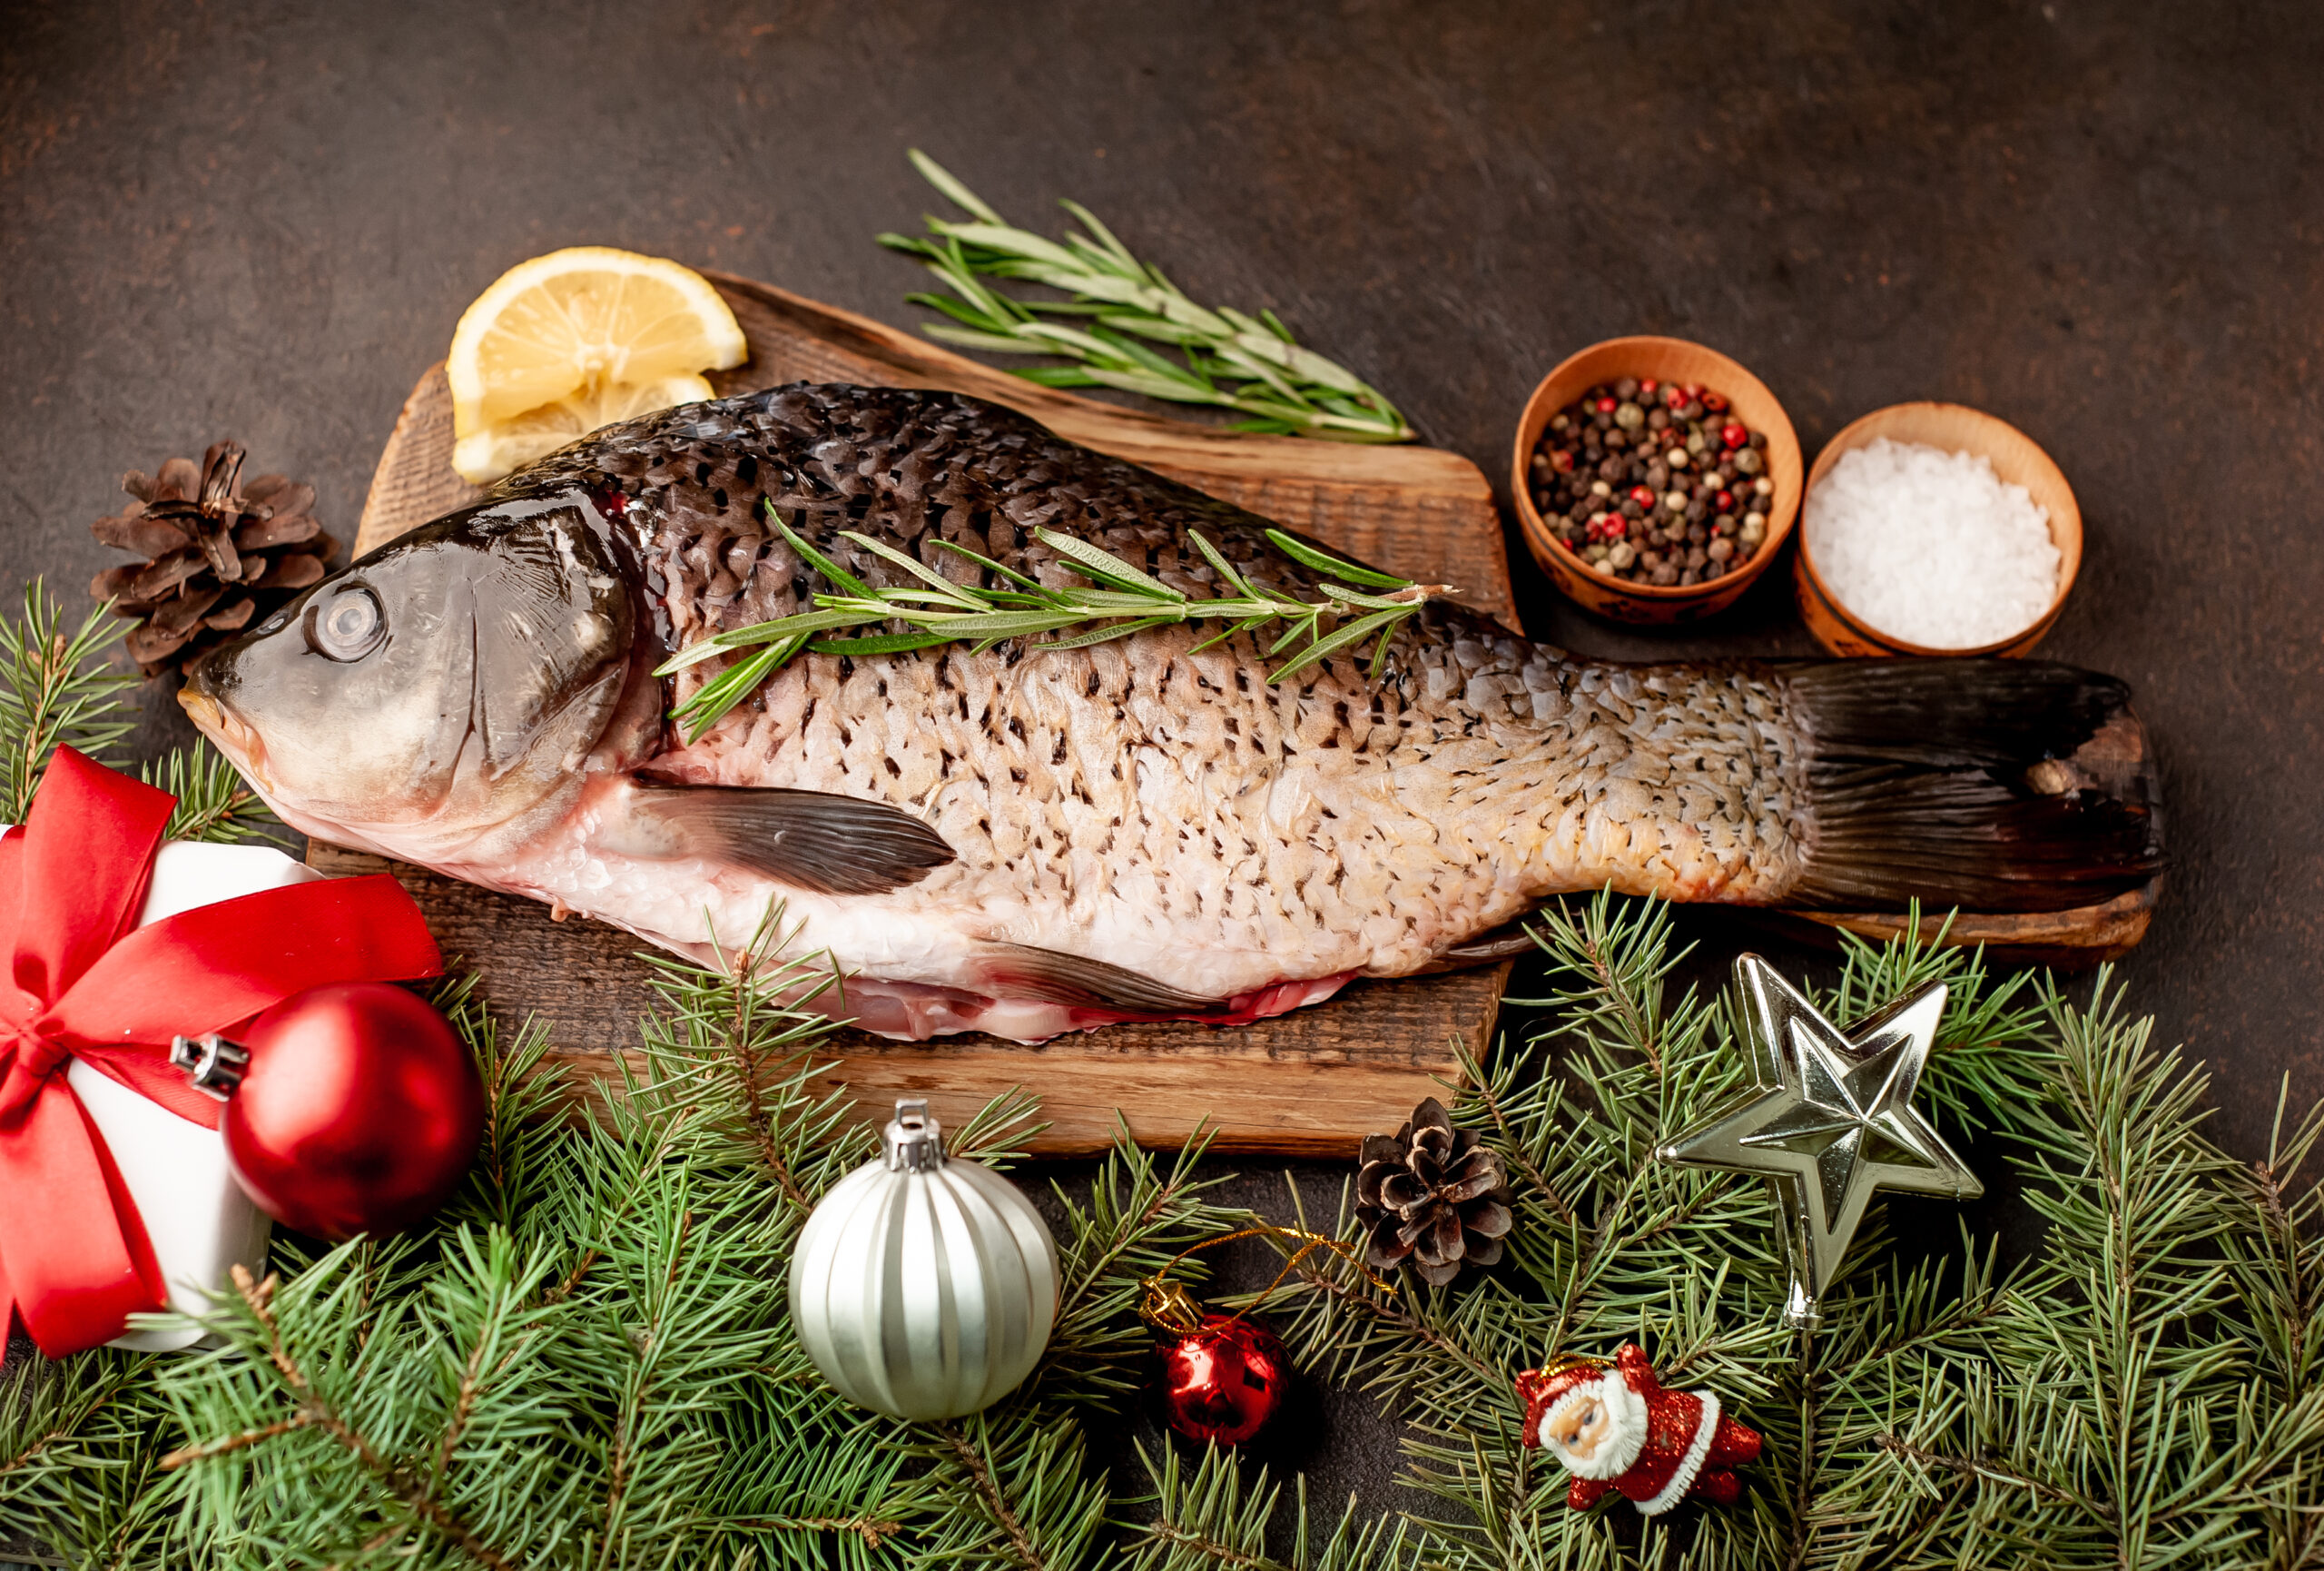 Raw,Carp,For,Preparation,For,The,Holiday,Christmas,On,A